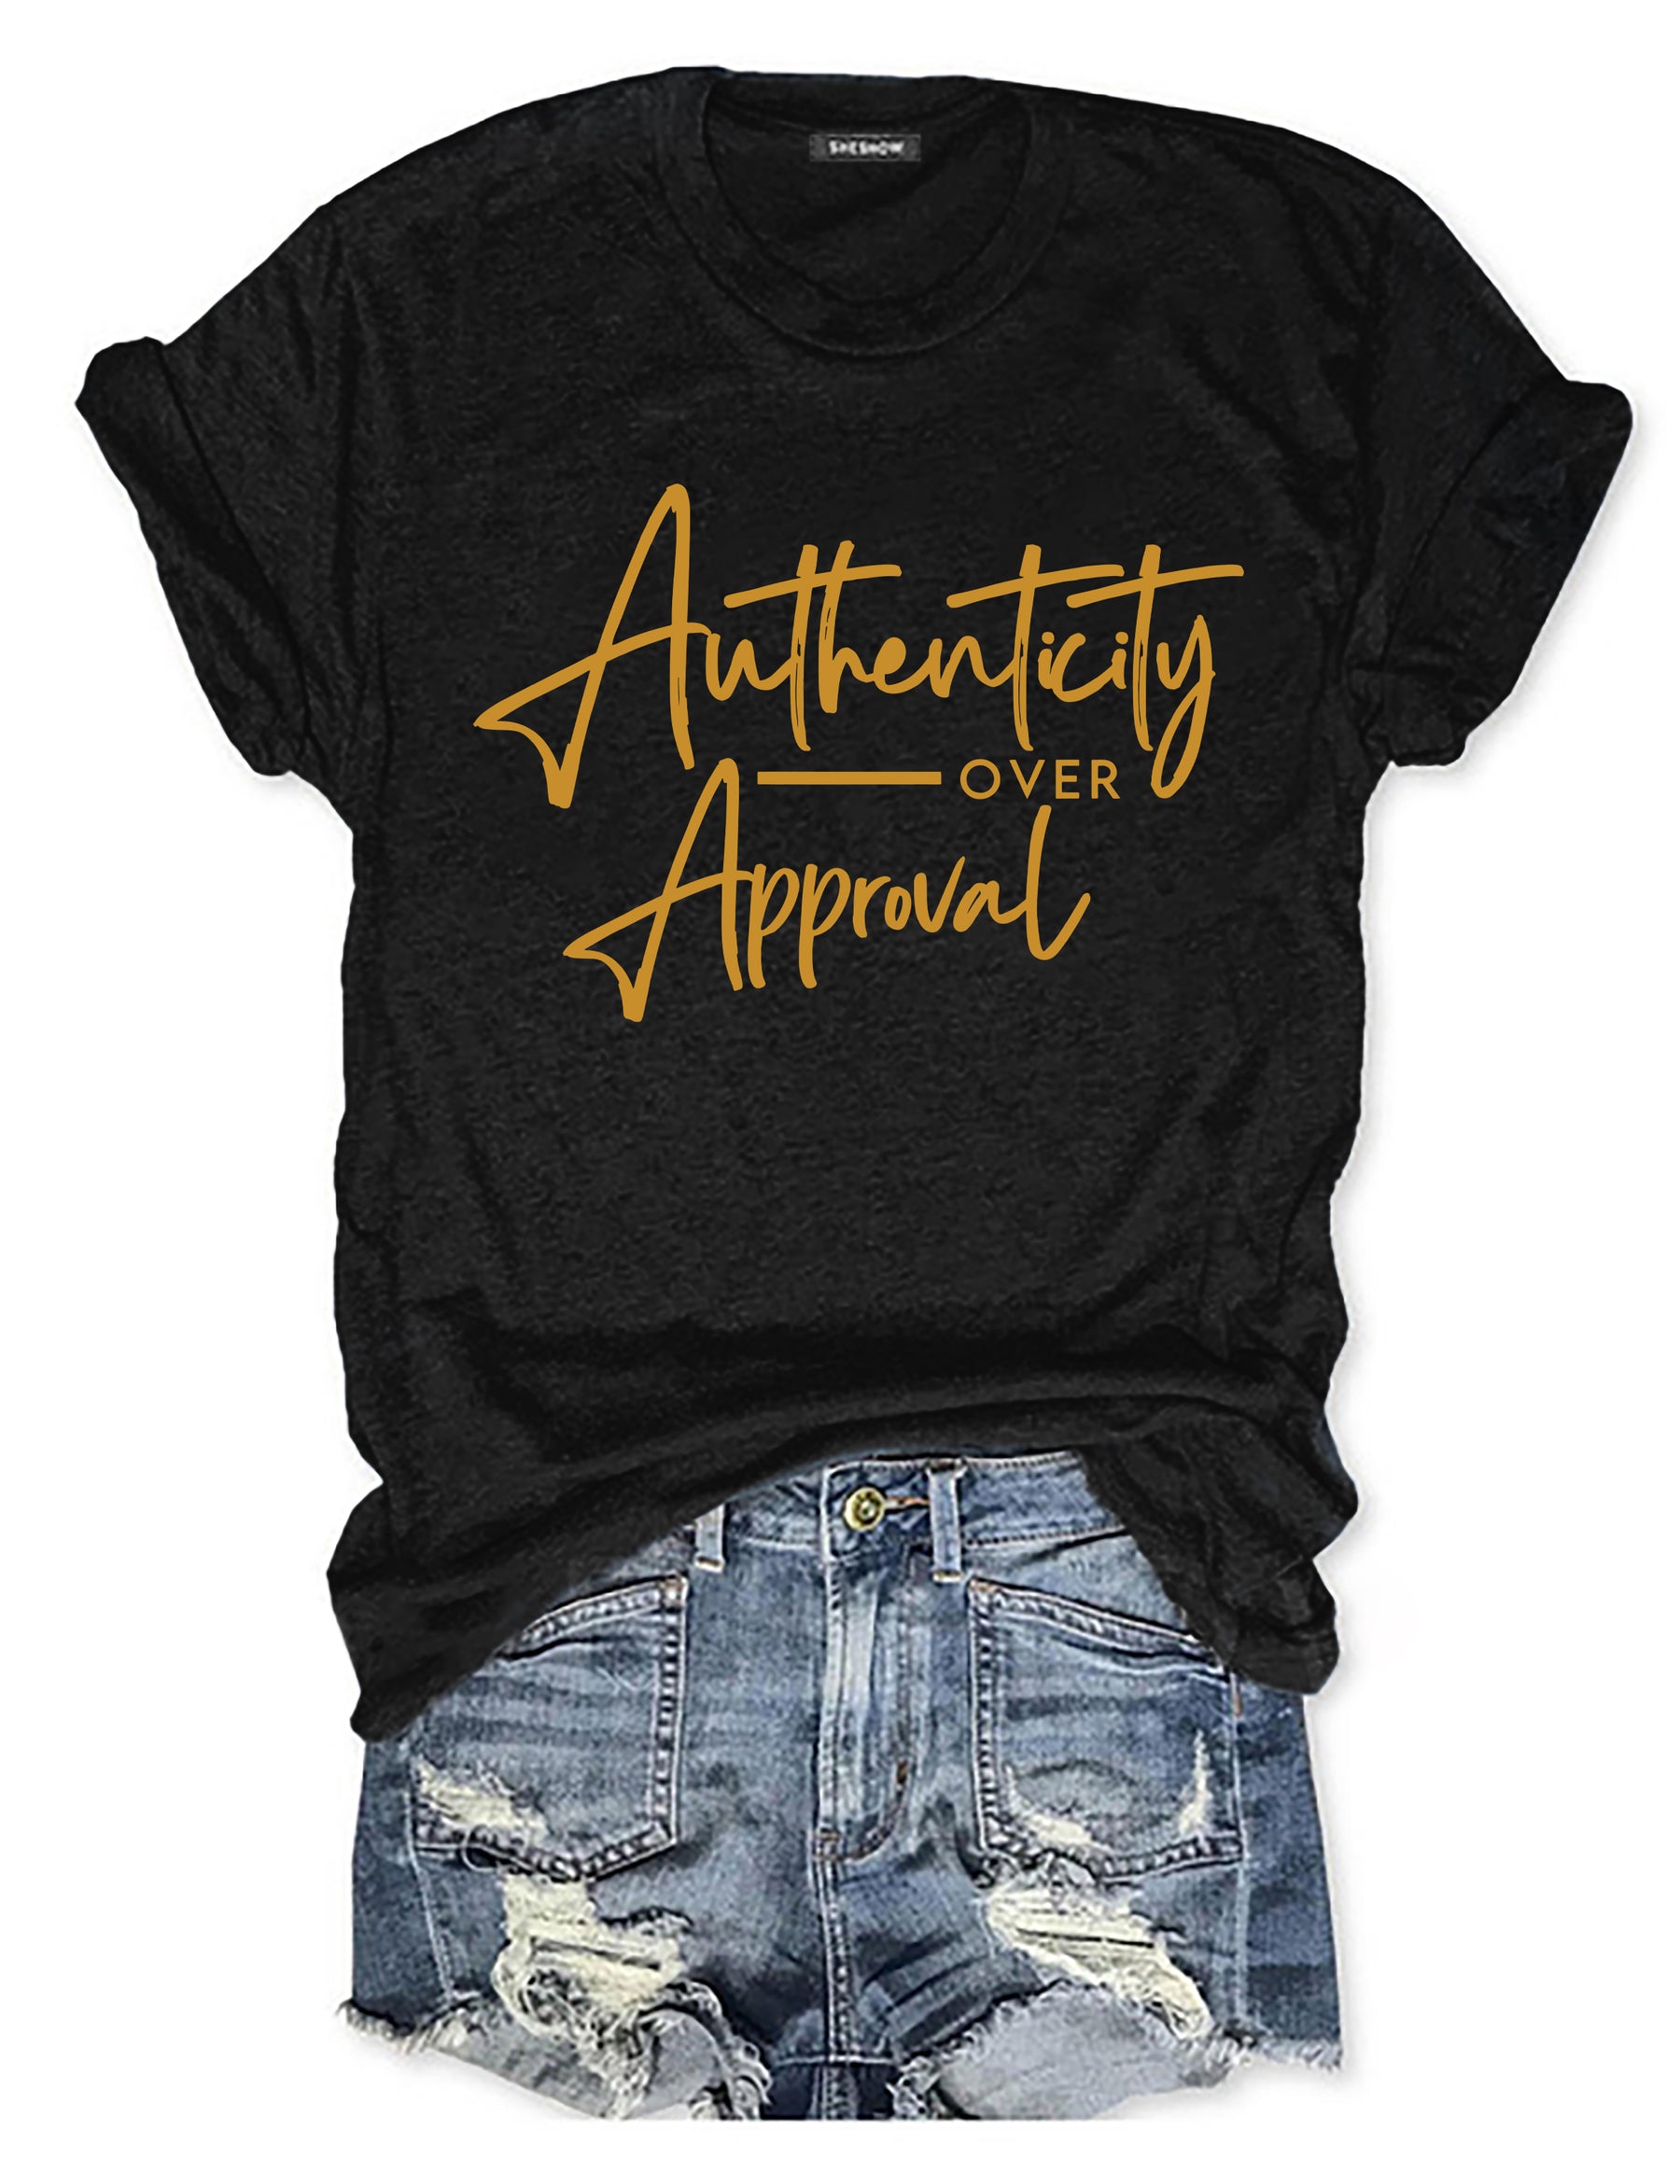 Authenticity Over Approval T-shirt